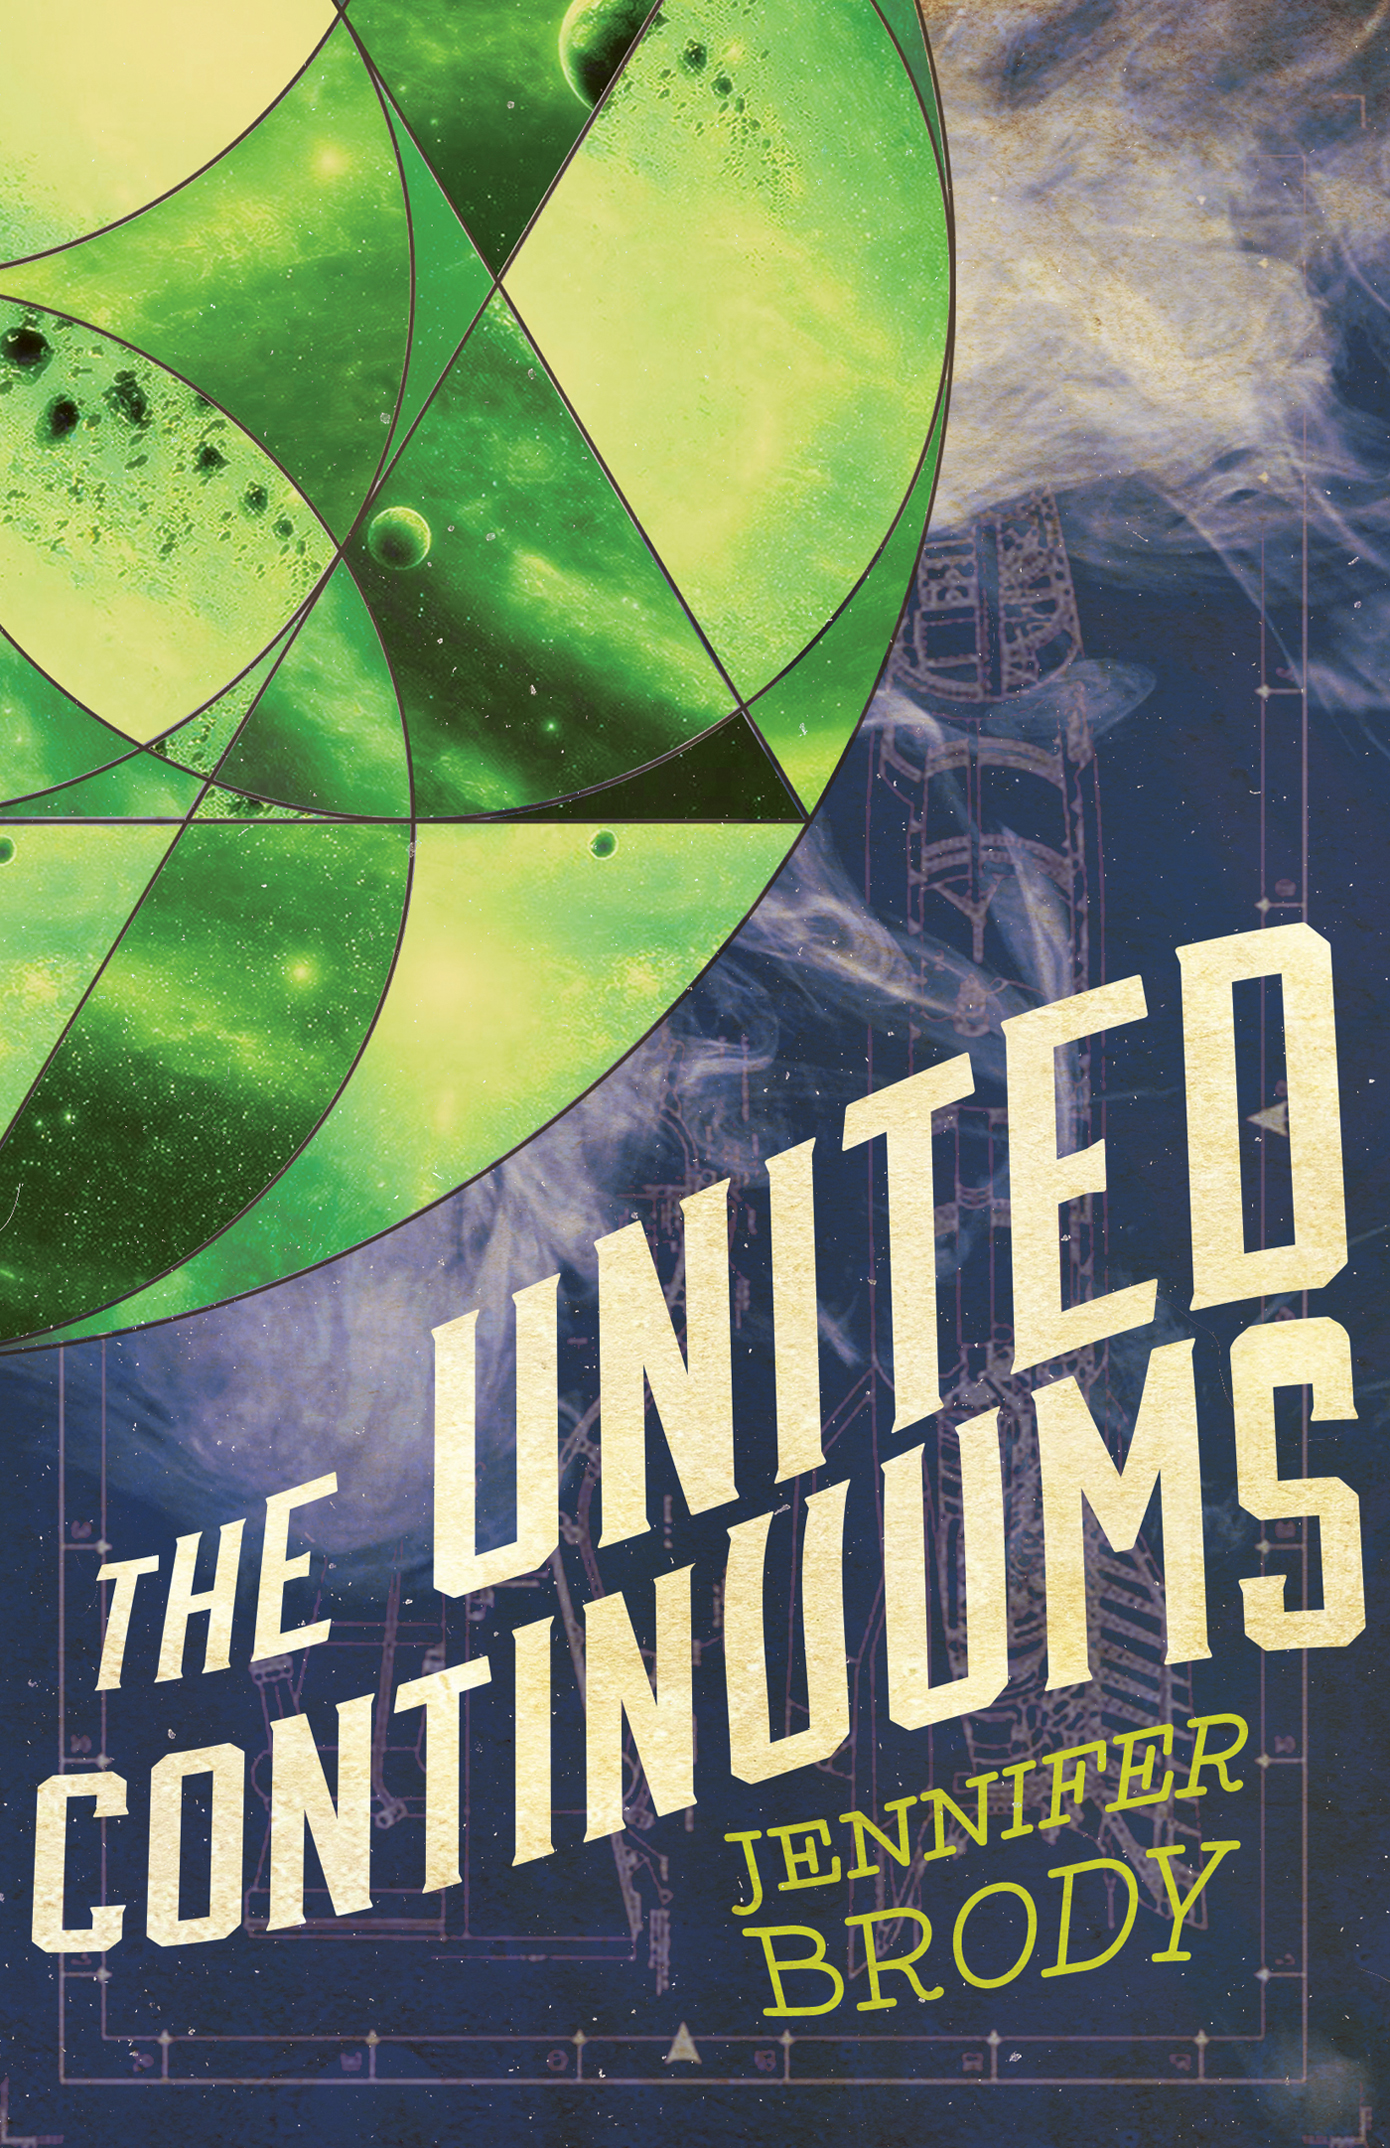 The United Continuums by Jennifer Brody